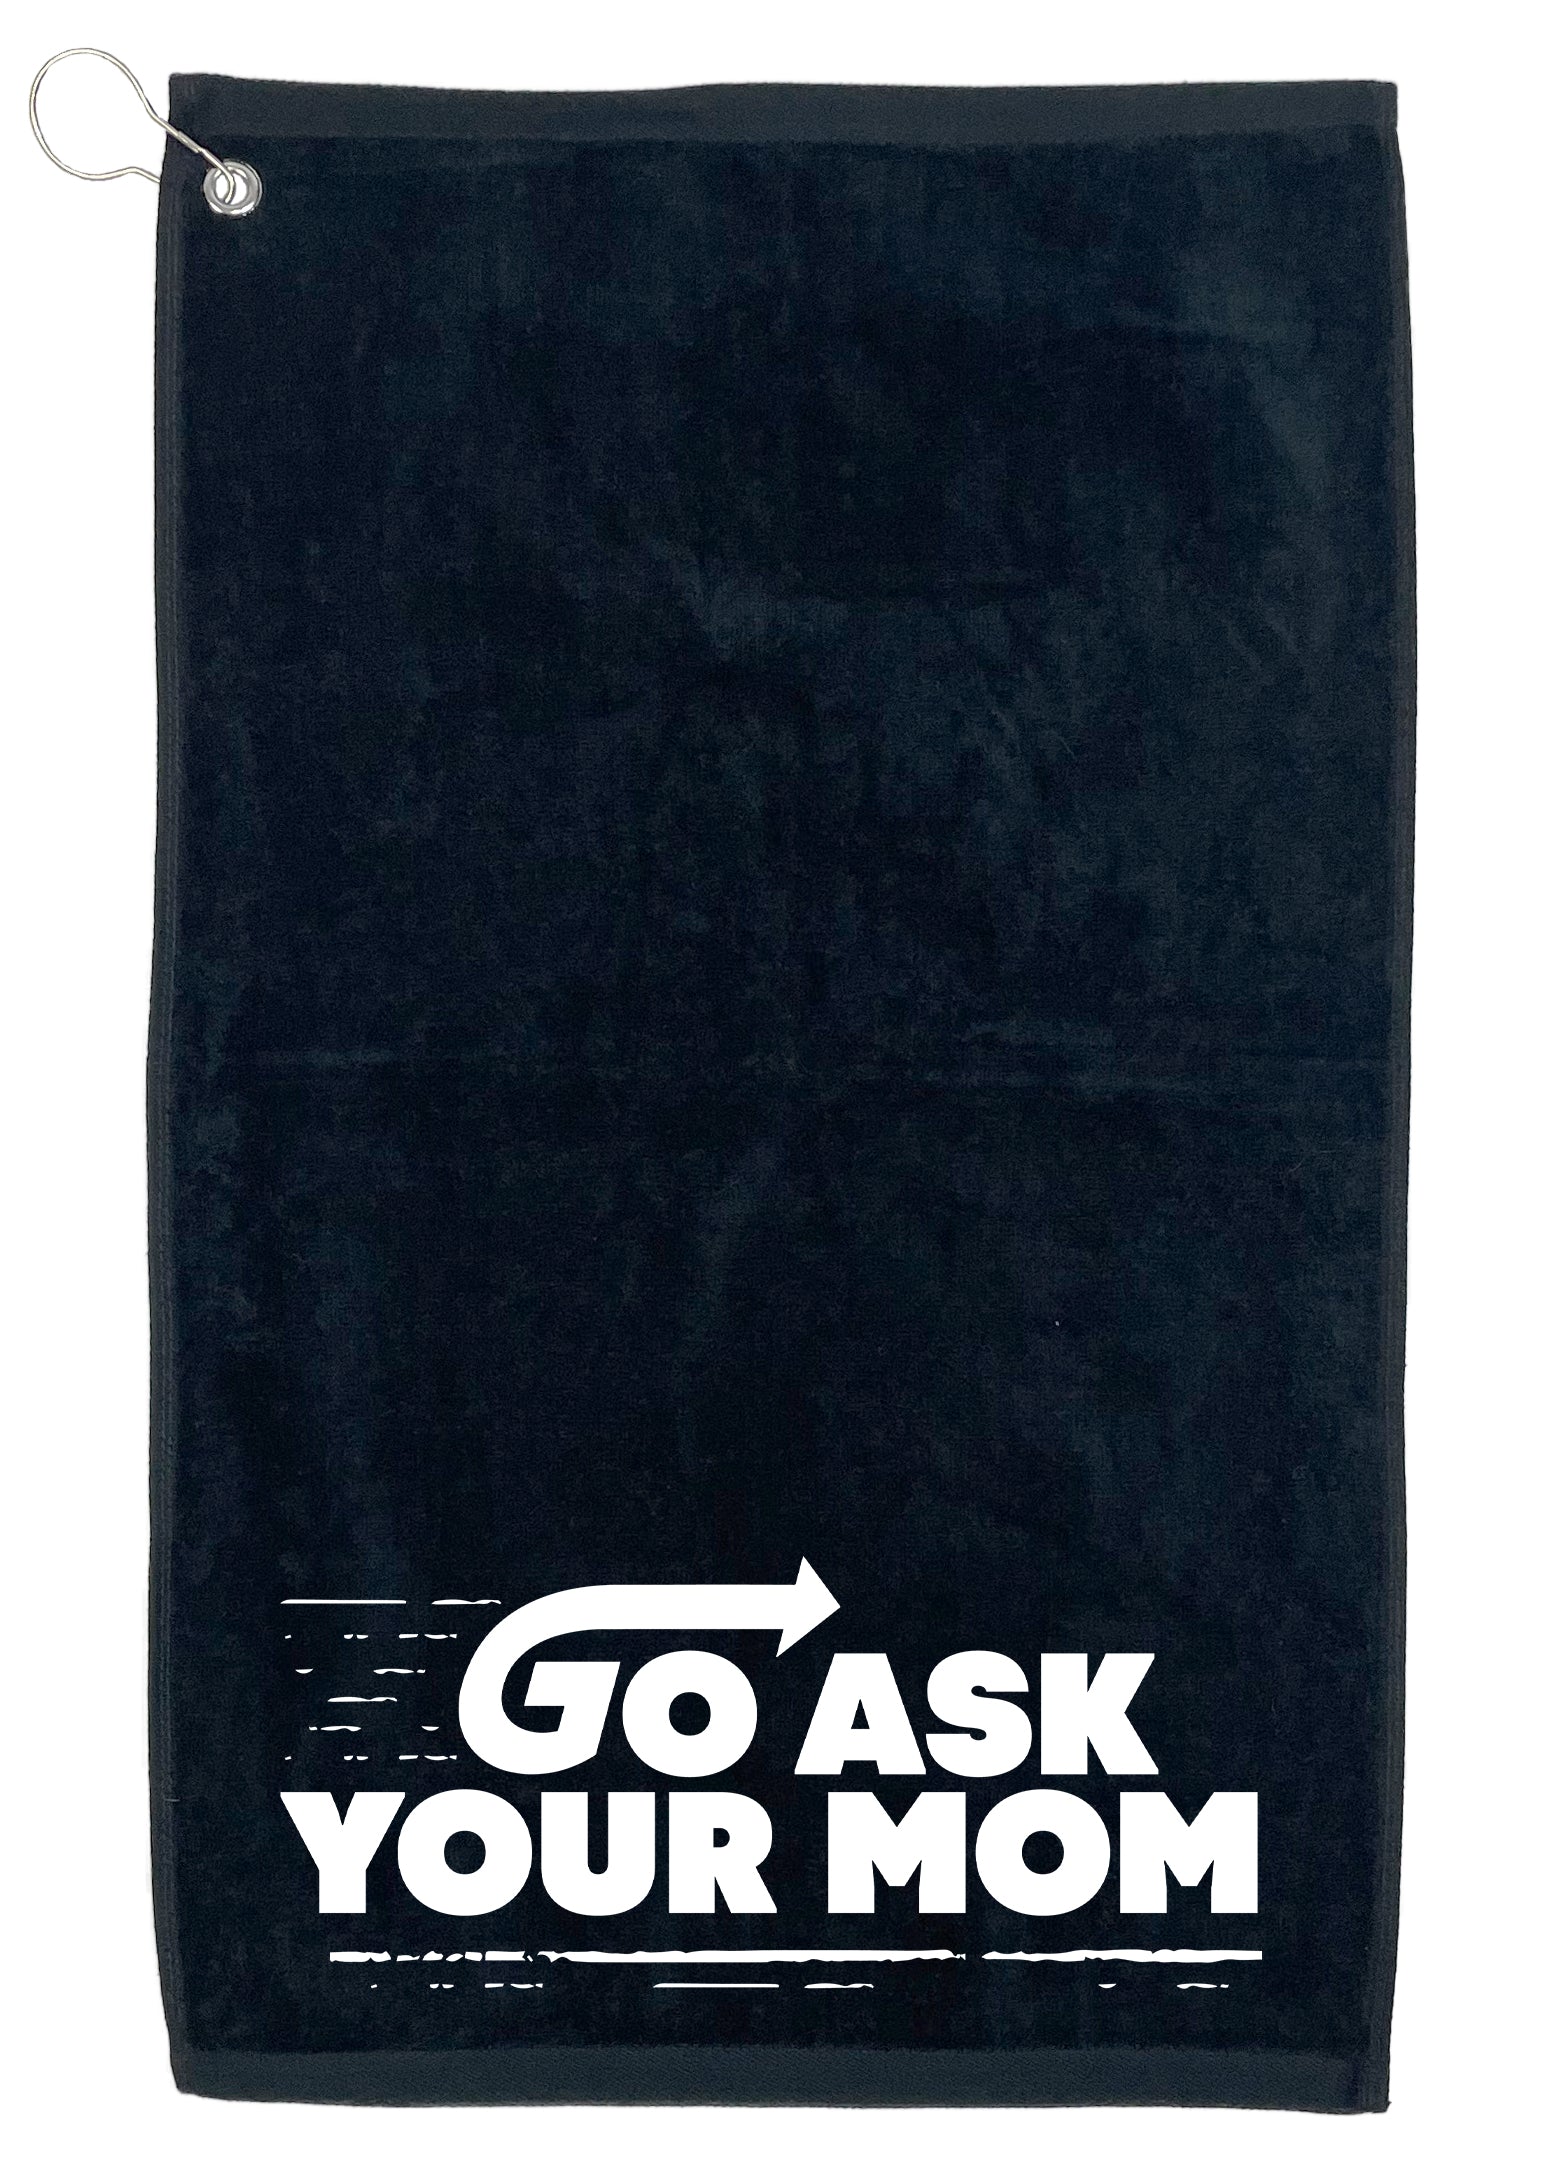 Go Ask your Mom, Golf Towel - Funny T Shirts & Graphic Tees